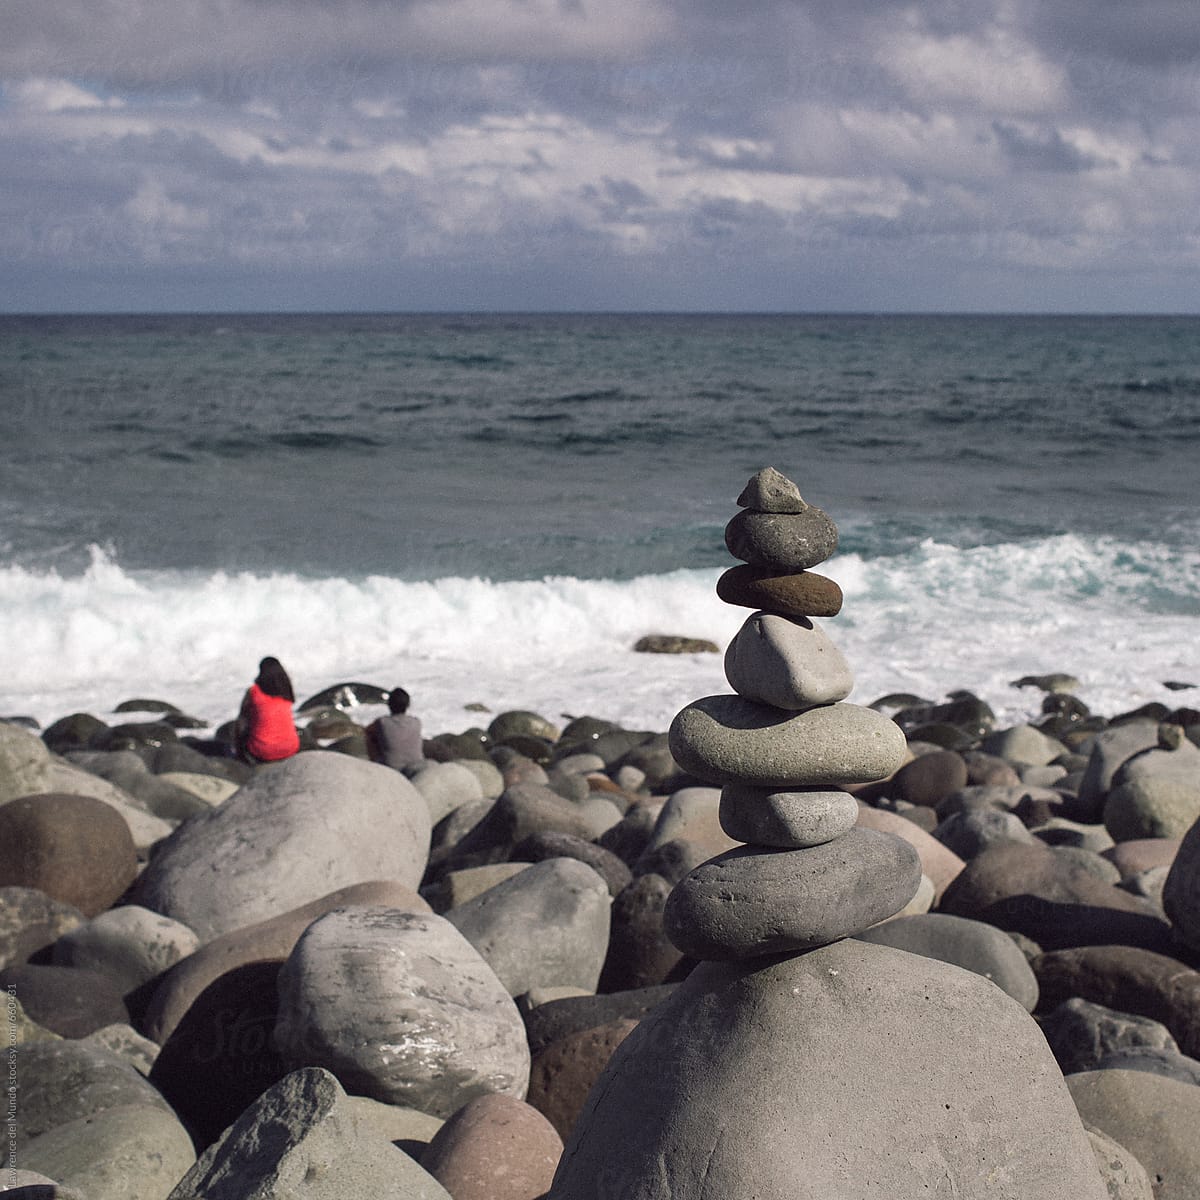 Stones stacked one on top of the other on a beach full of boulders